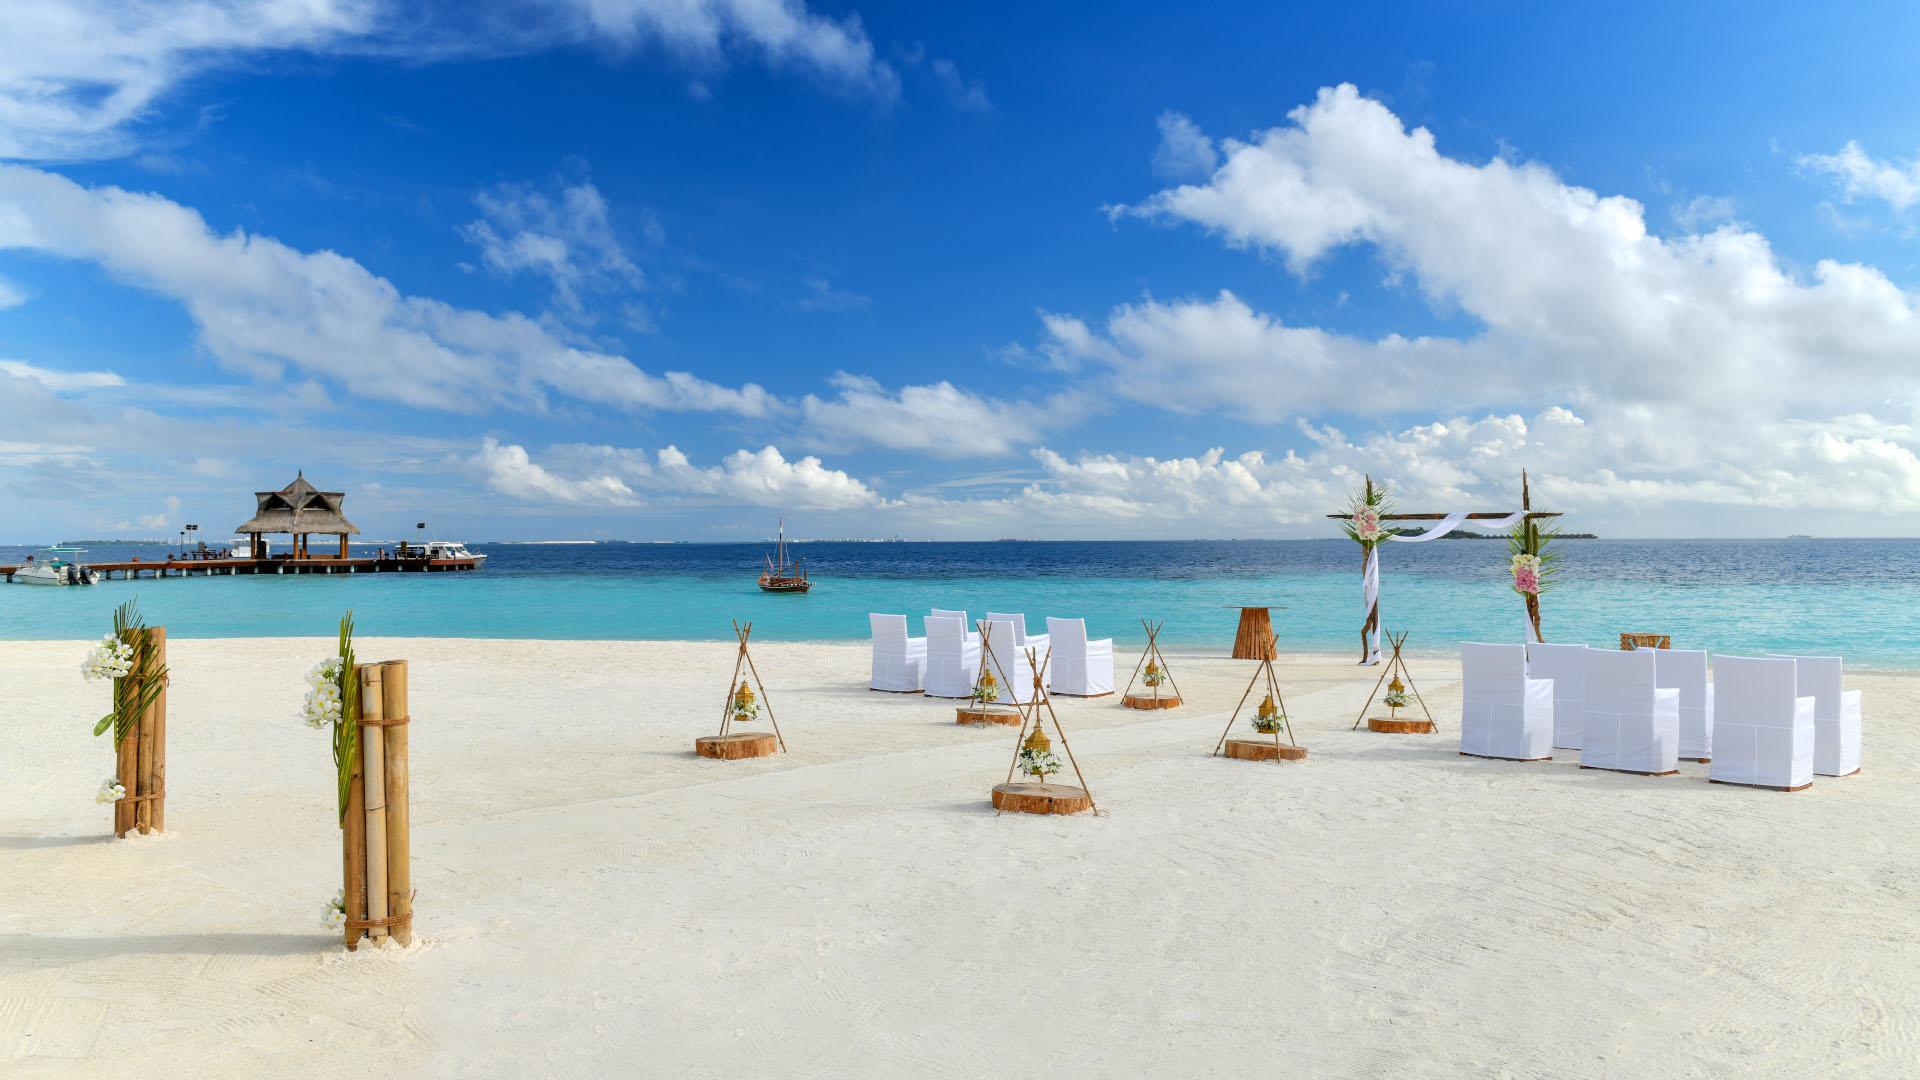 Weddings in the Maldives